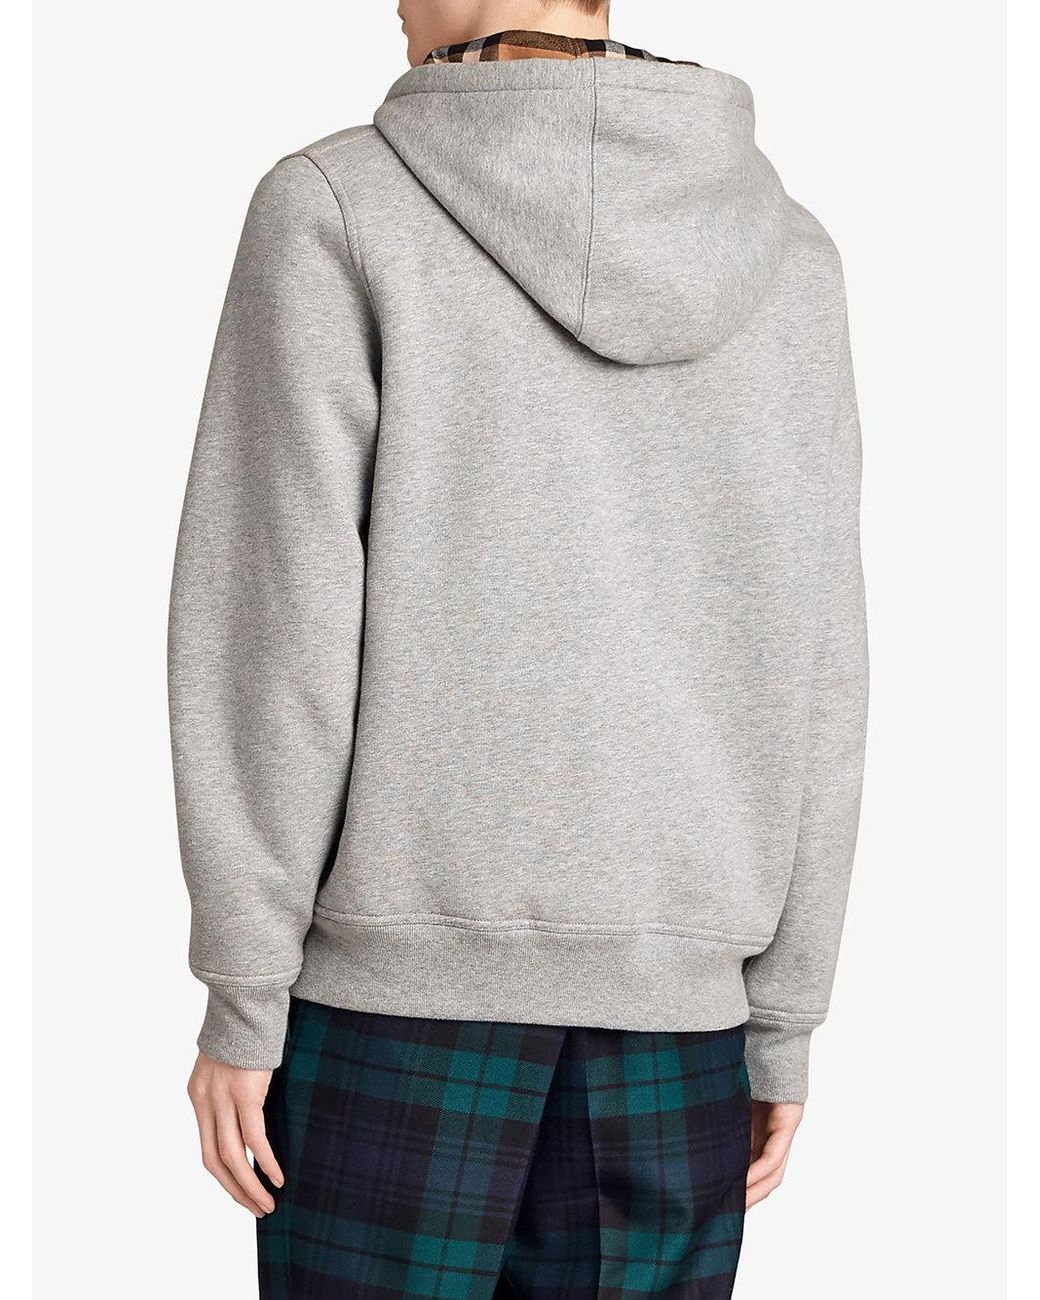 Burberry Check Detail Hooded Sweatshirt in Gray for Men | Lyst